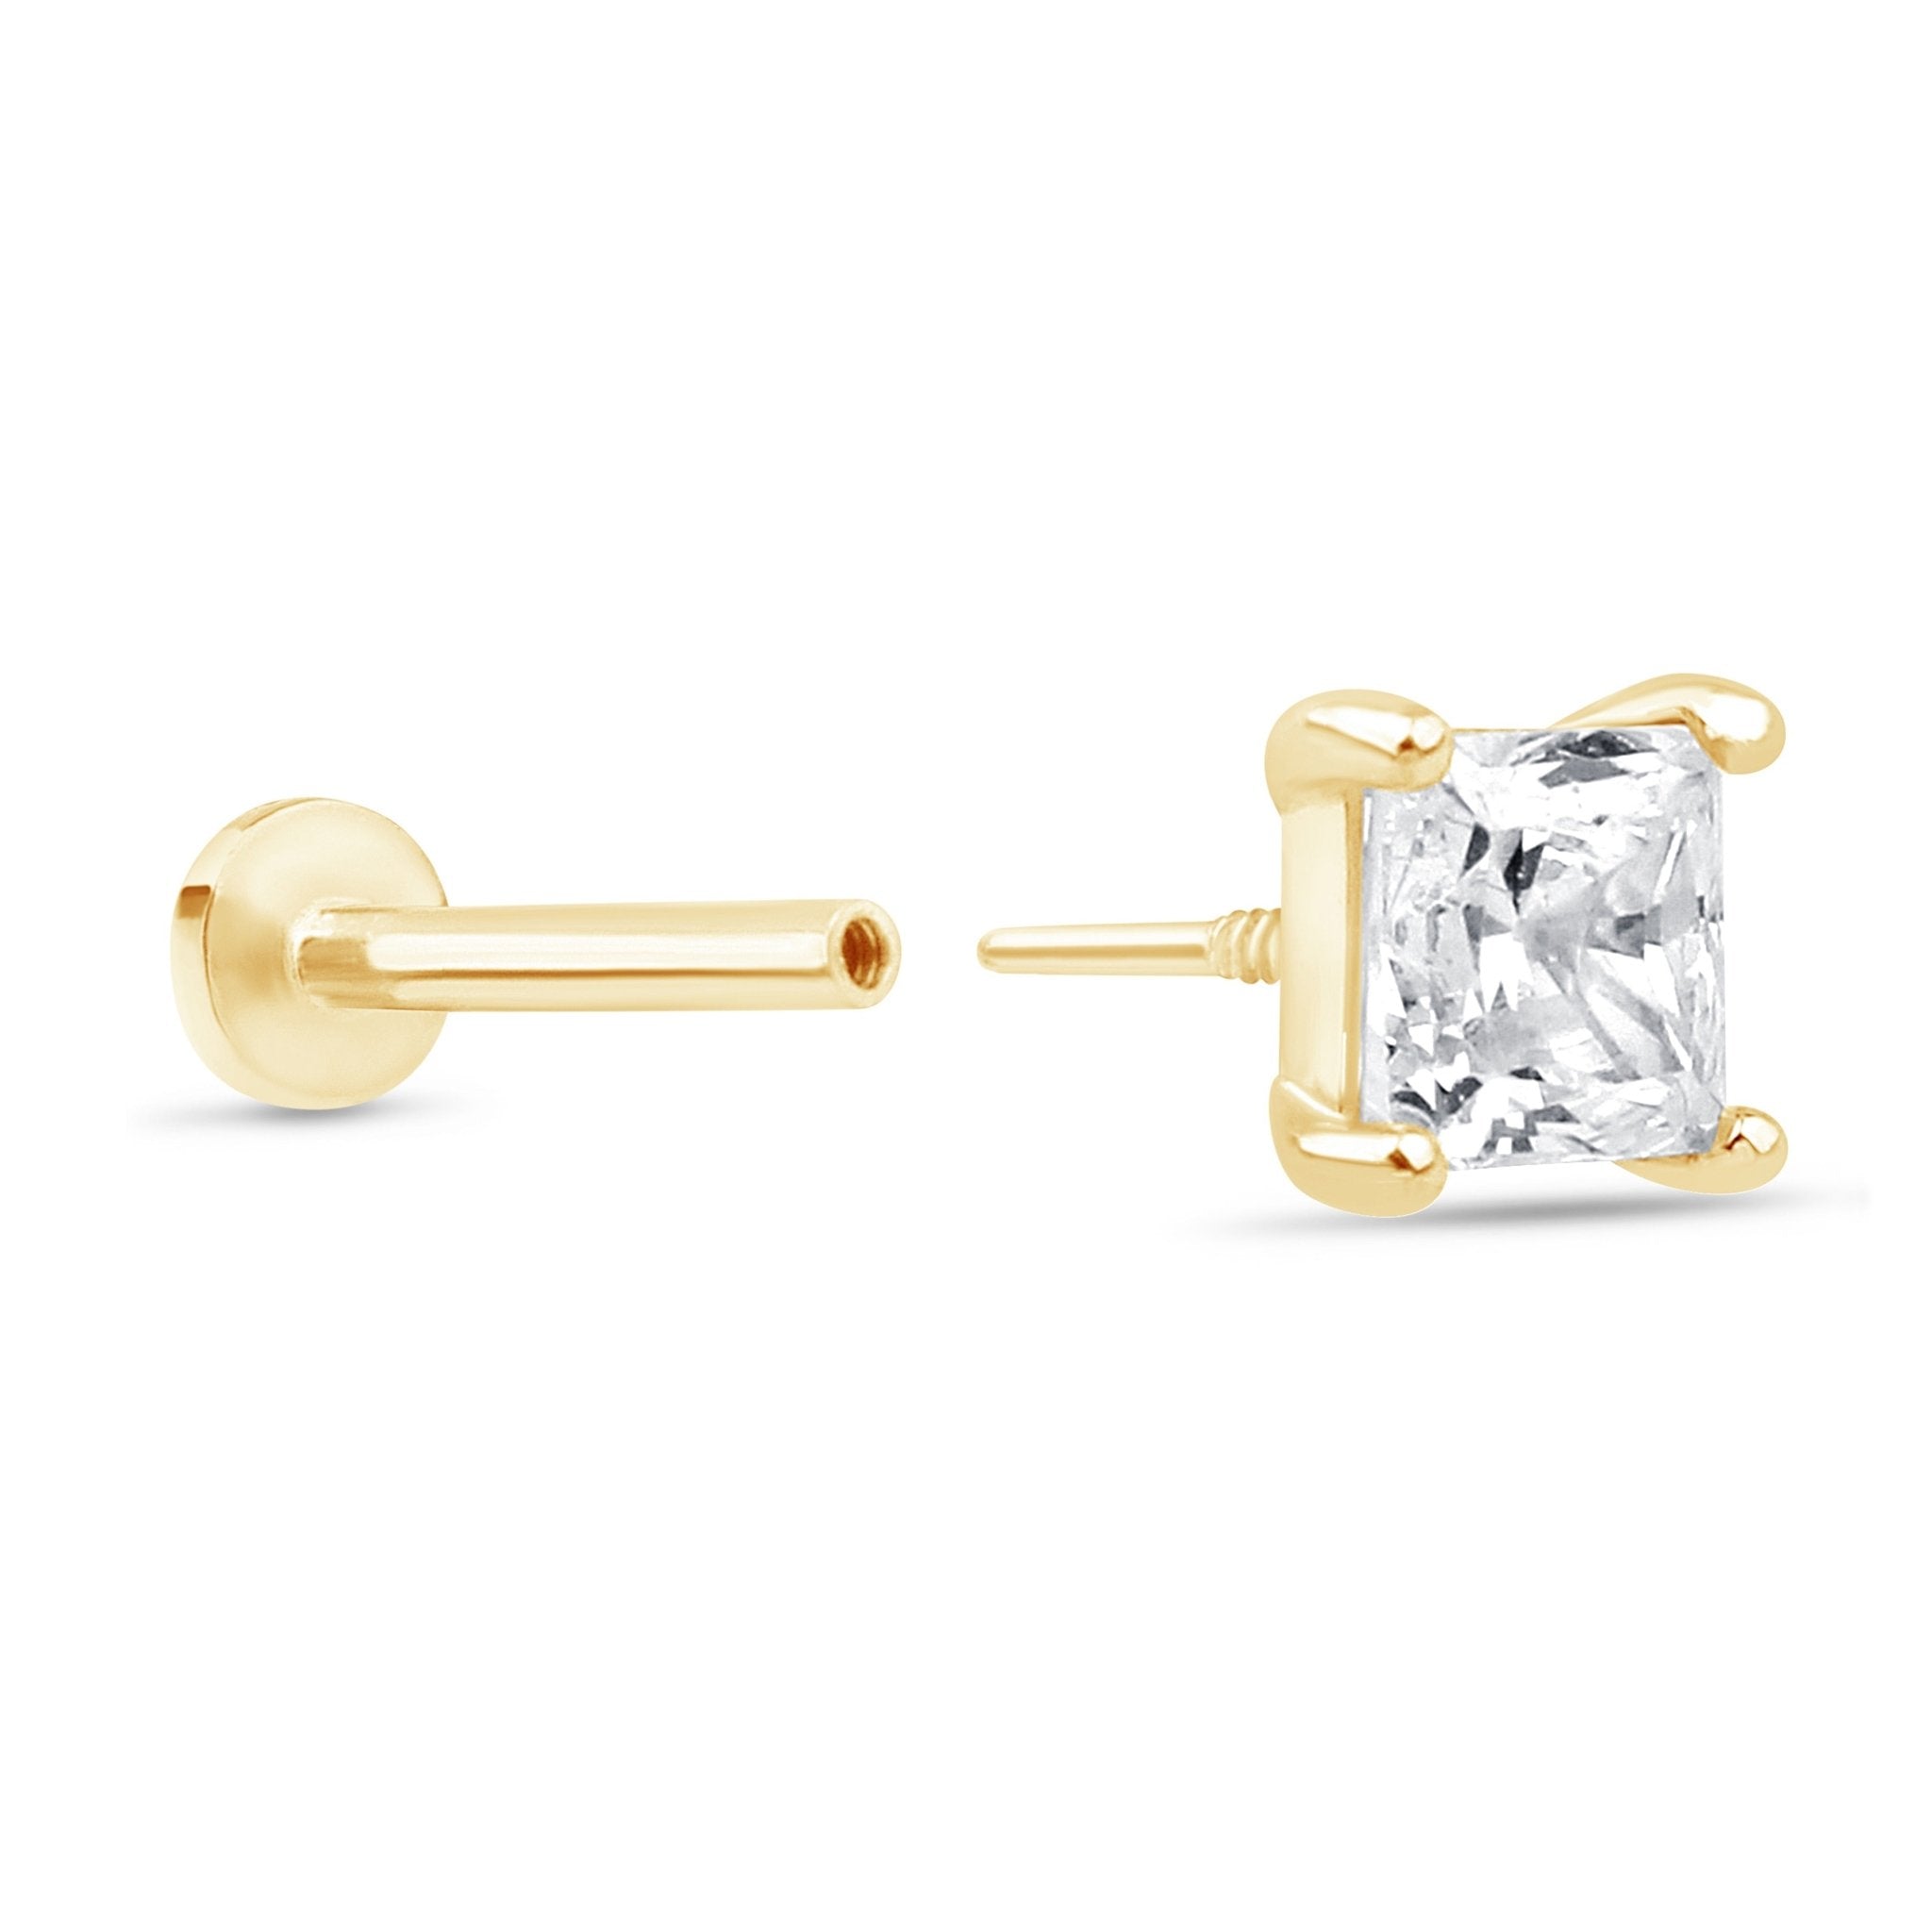 Cubic Zirconia Princess Cut Earring in Solid 14k Yellow Gold Earrings Estella Collection #product_description# 18589 new New Arrivals test test mechanic #tag4# #tag5# #tag6# #tag7# #tag8# #tag9# #tag10#